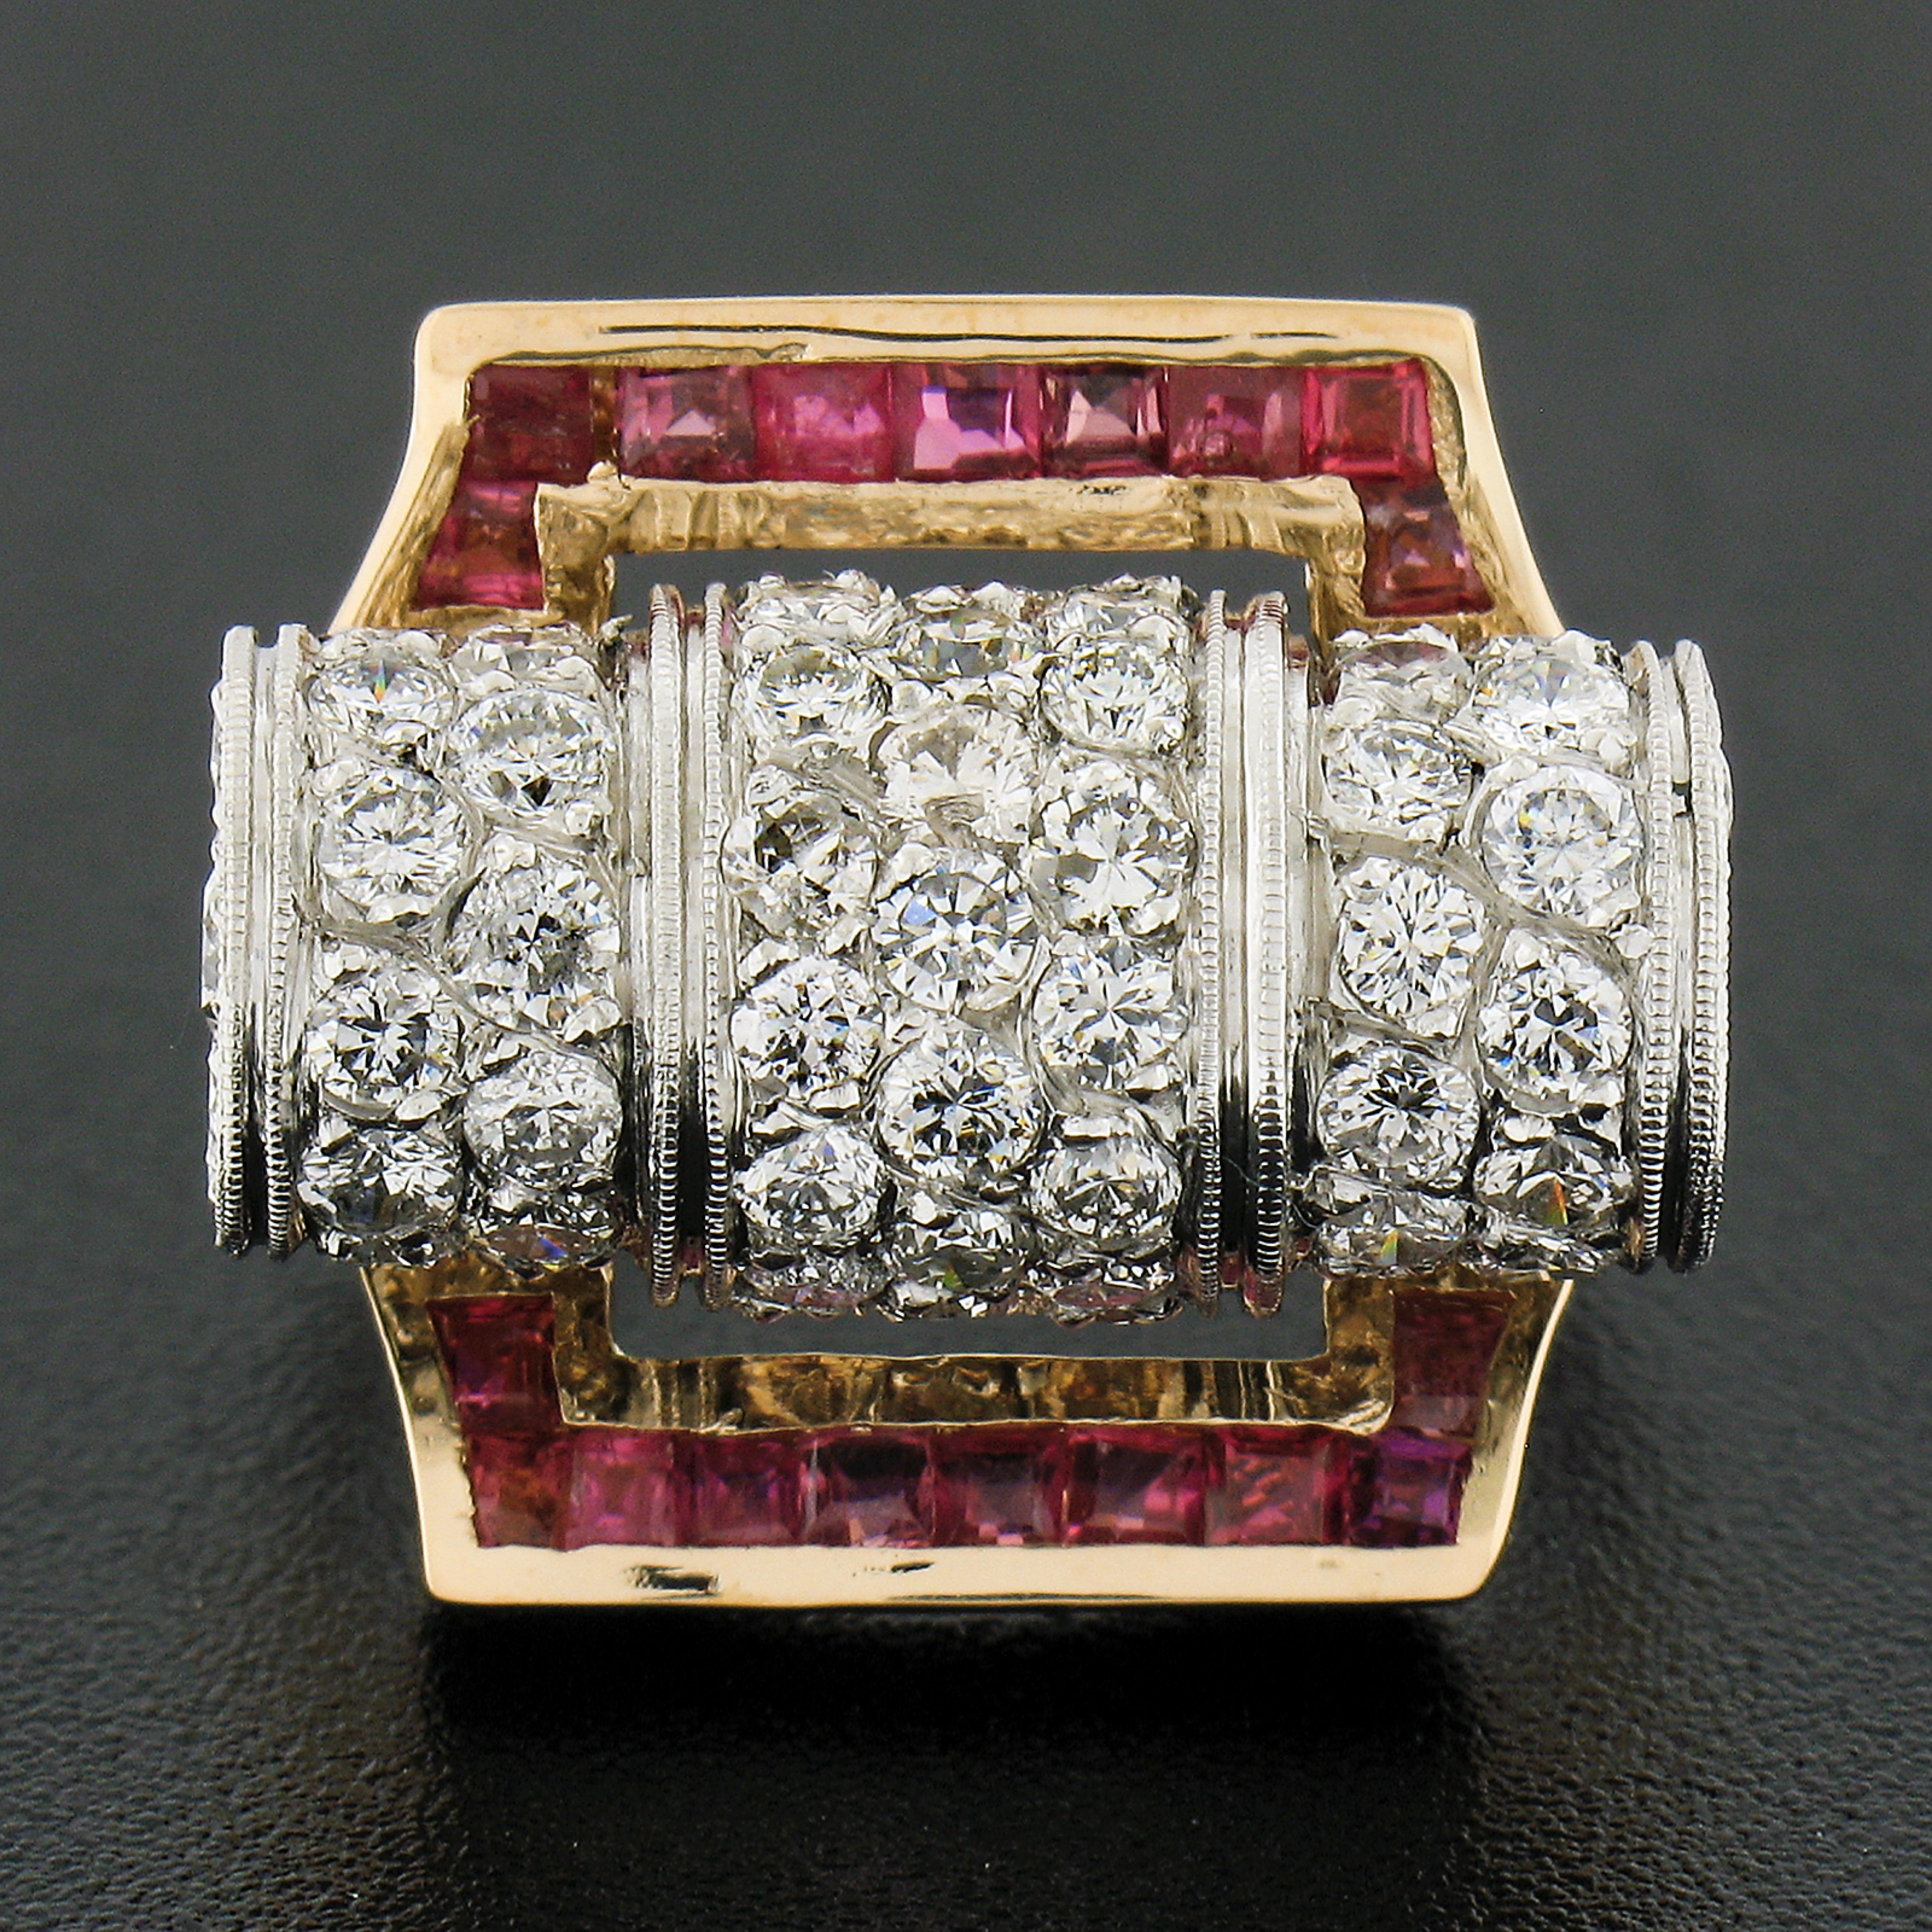 Here we have an absolutely magnificence vintage cocktail ring and insert set that was crafted solid 14k gold and platinum. The center ring features a unique barrel design that is completely drenched with fine quality diamonds that are neatly pave